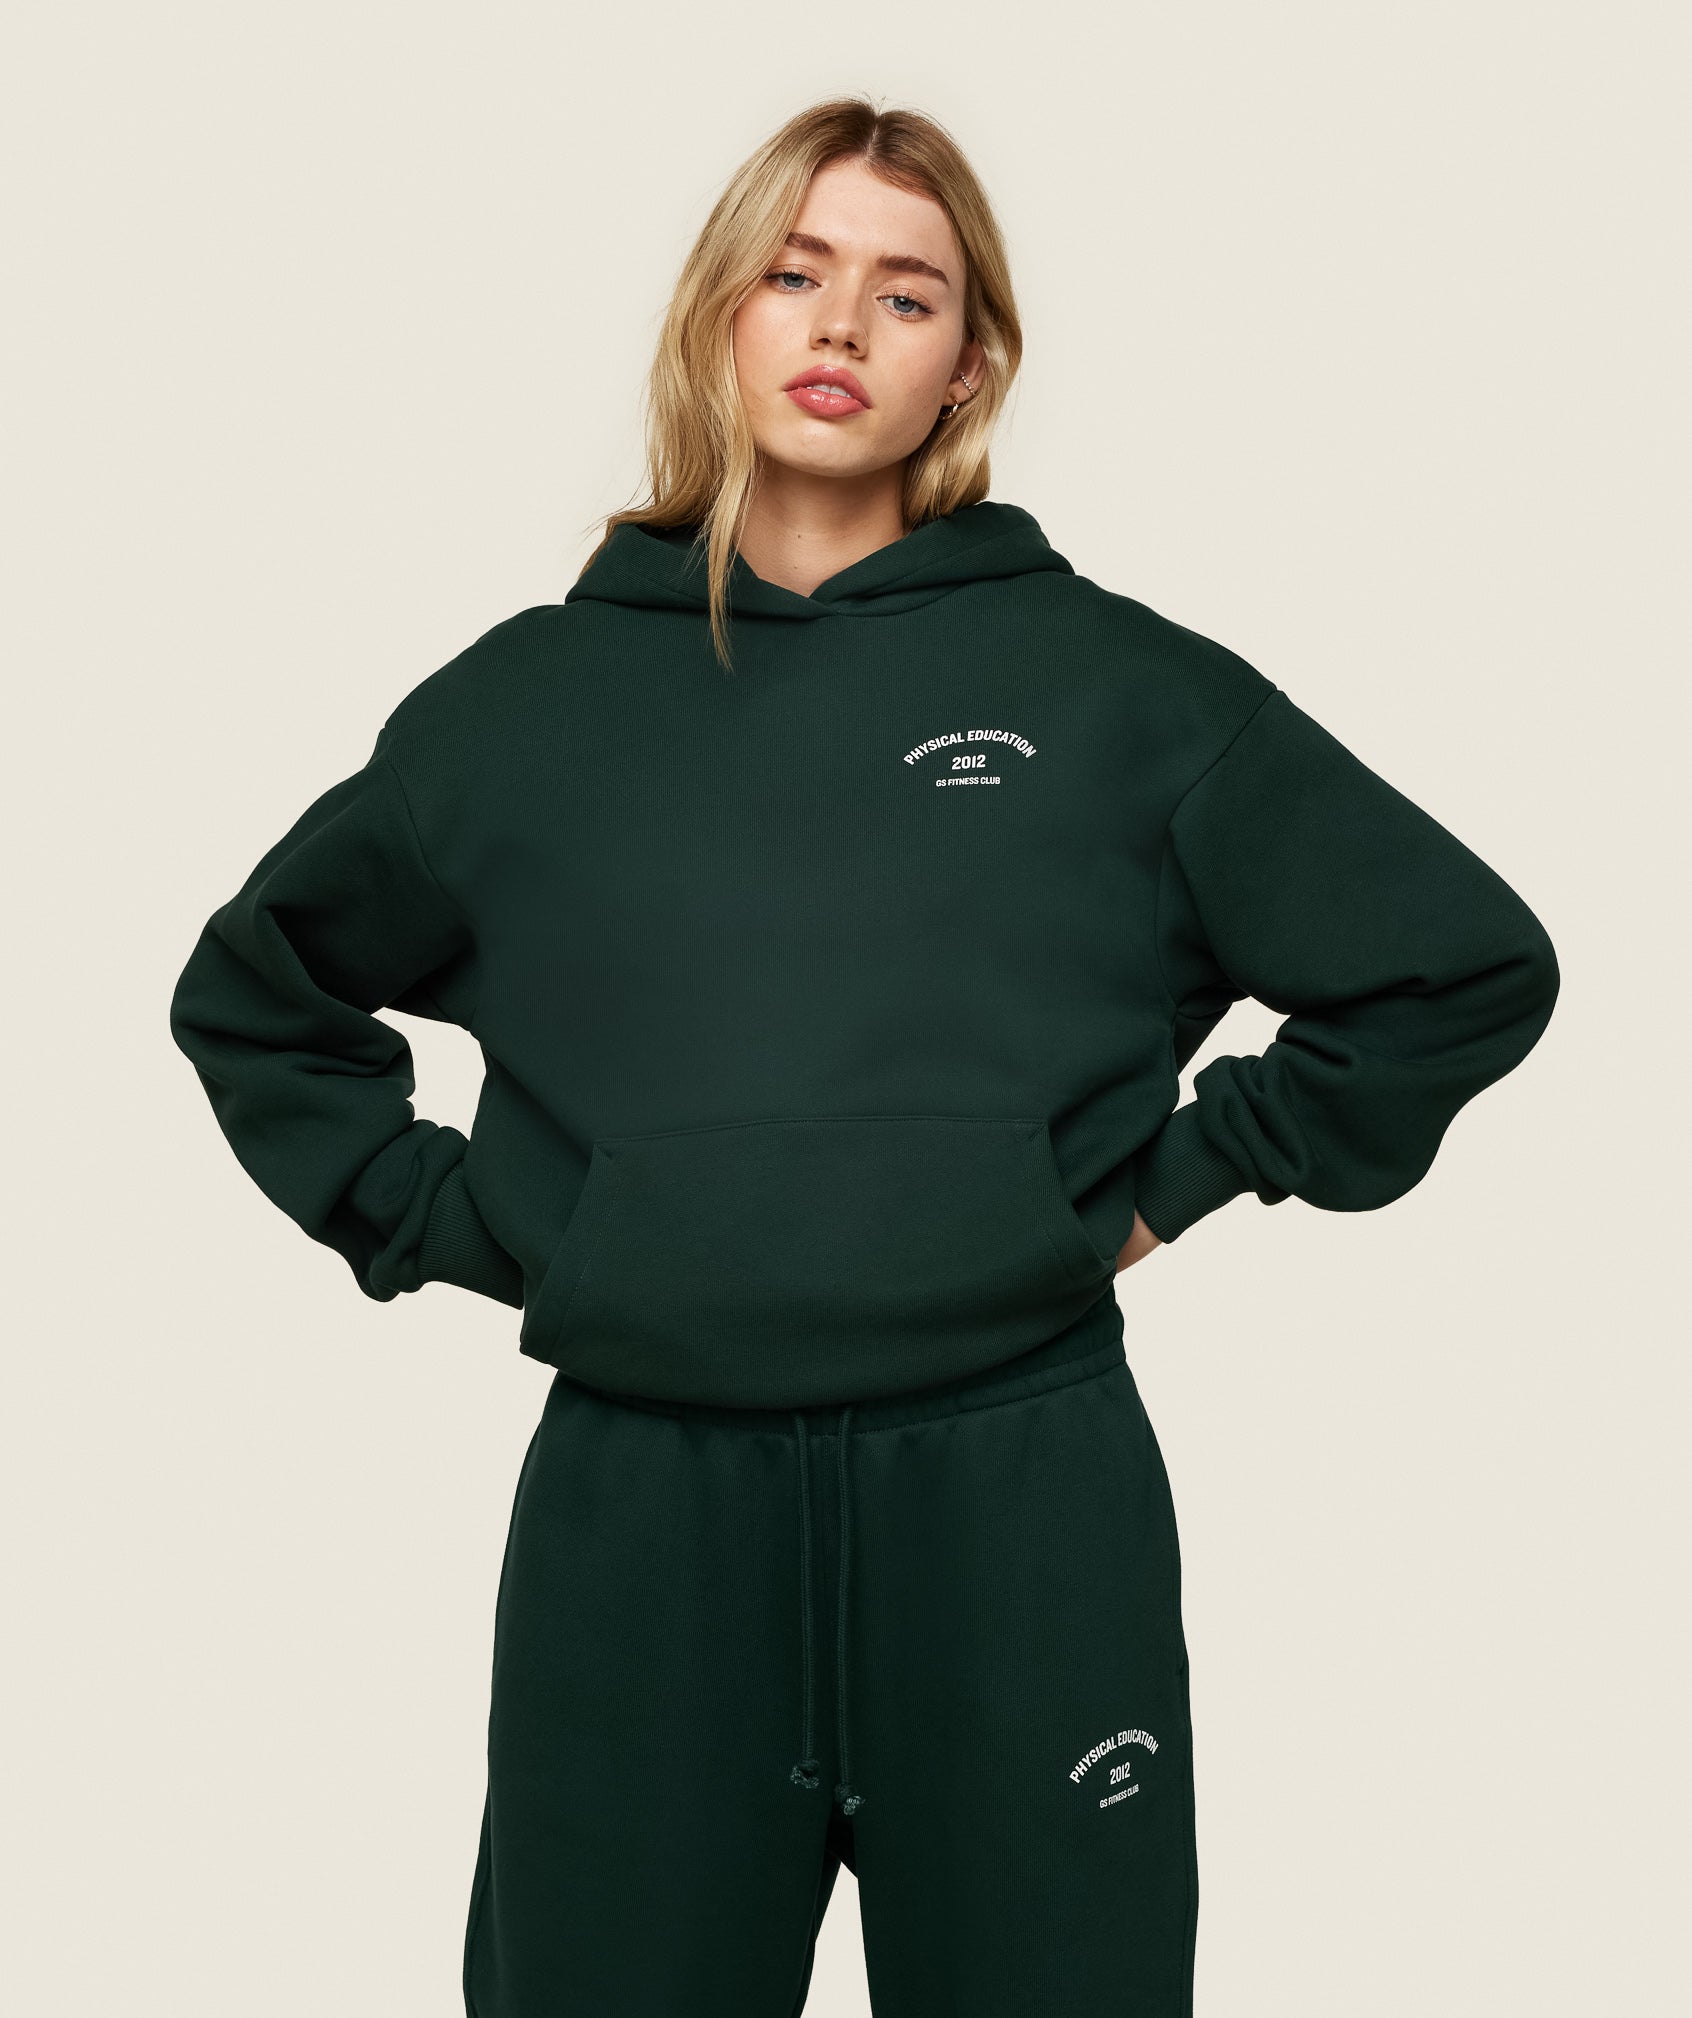 Phys Ed Graphic Hoodie in Green - view 1